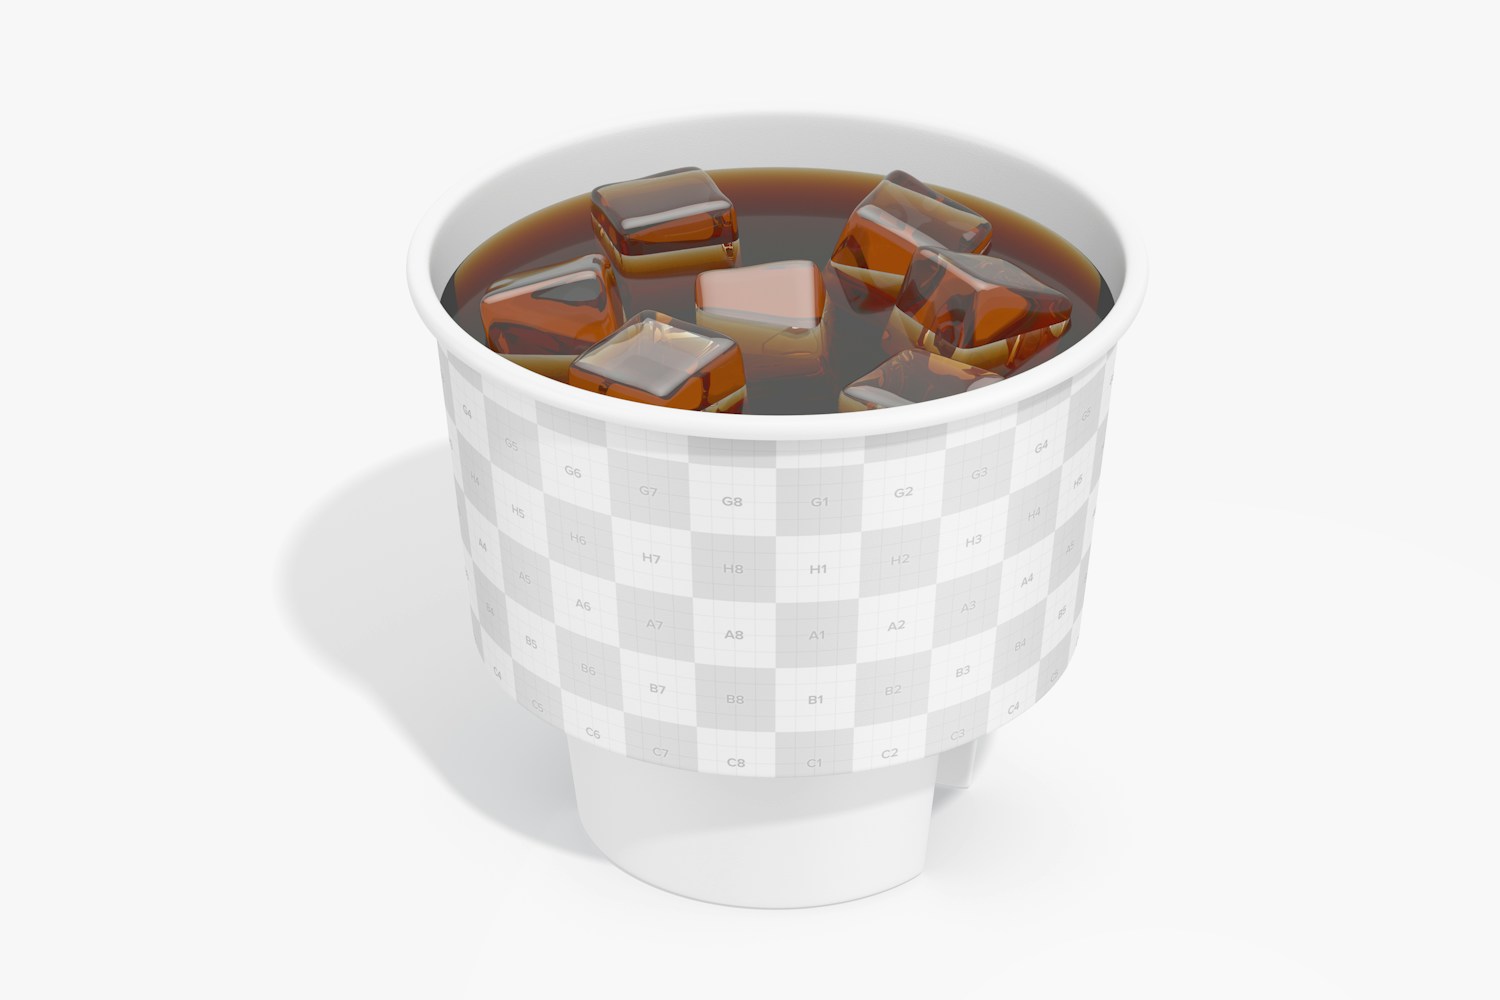 Small Drink Cup Mockup, Perspective